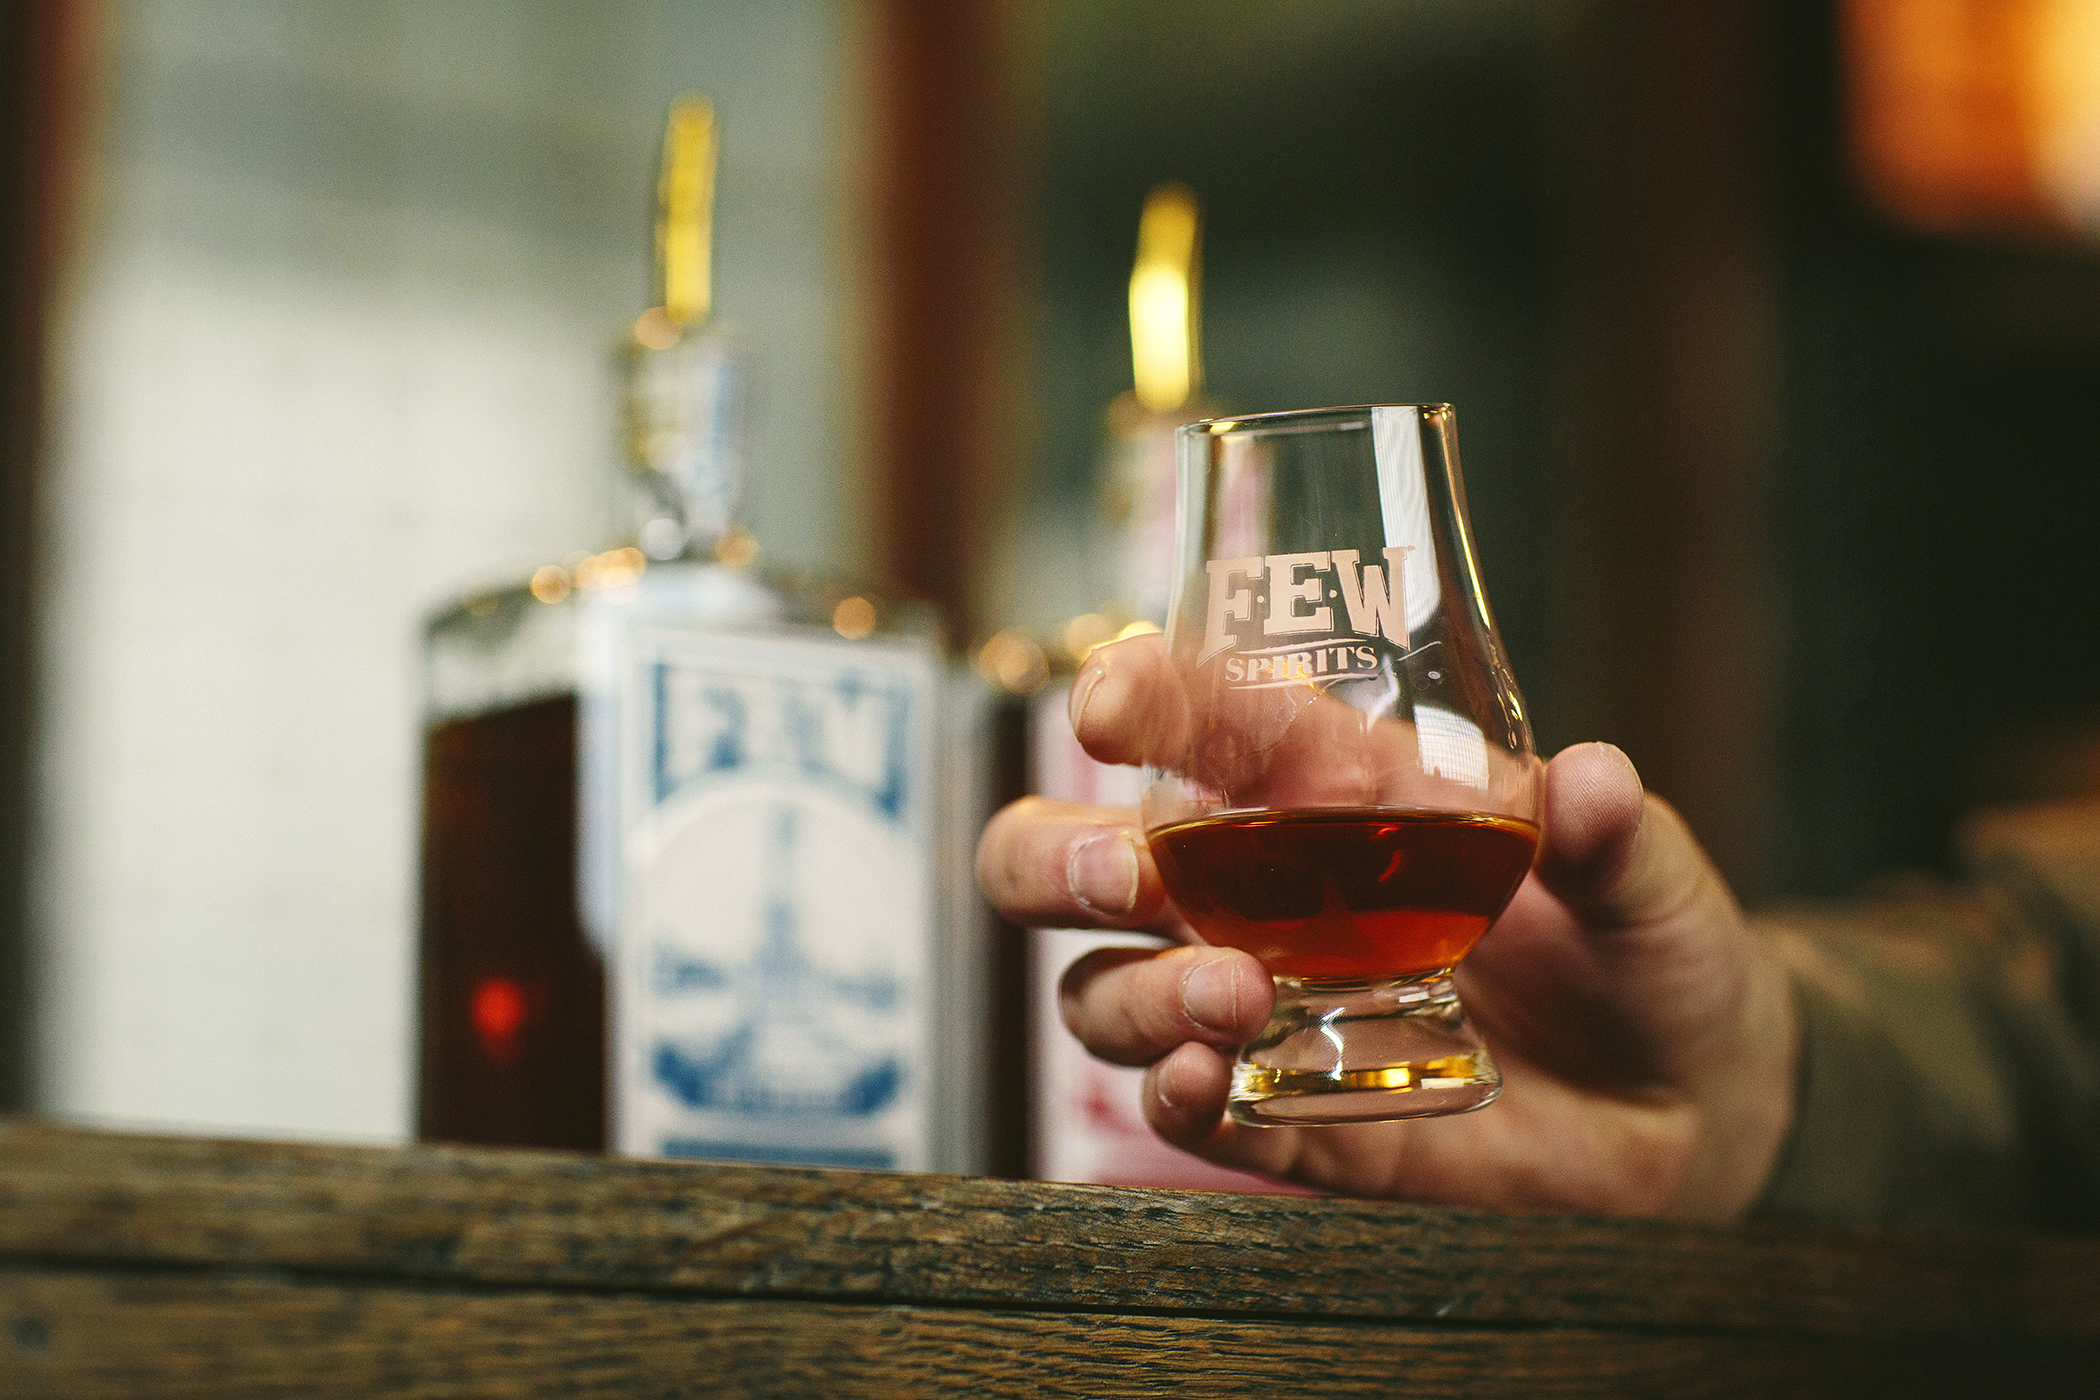 Lawyer-Turned-Distiller Gives New Meaning to 'Entrepreneurial Spirit'